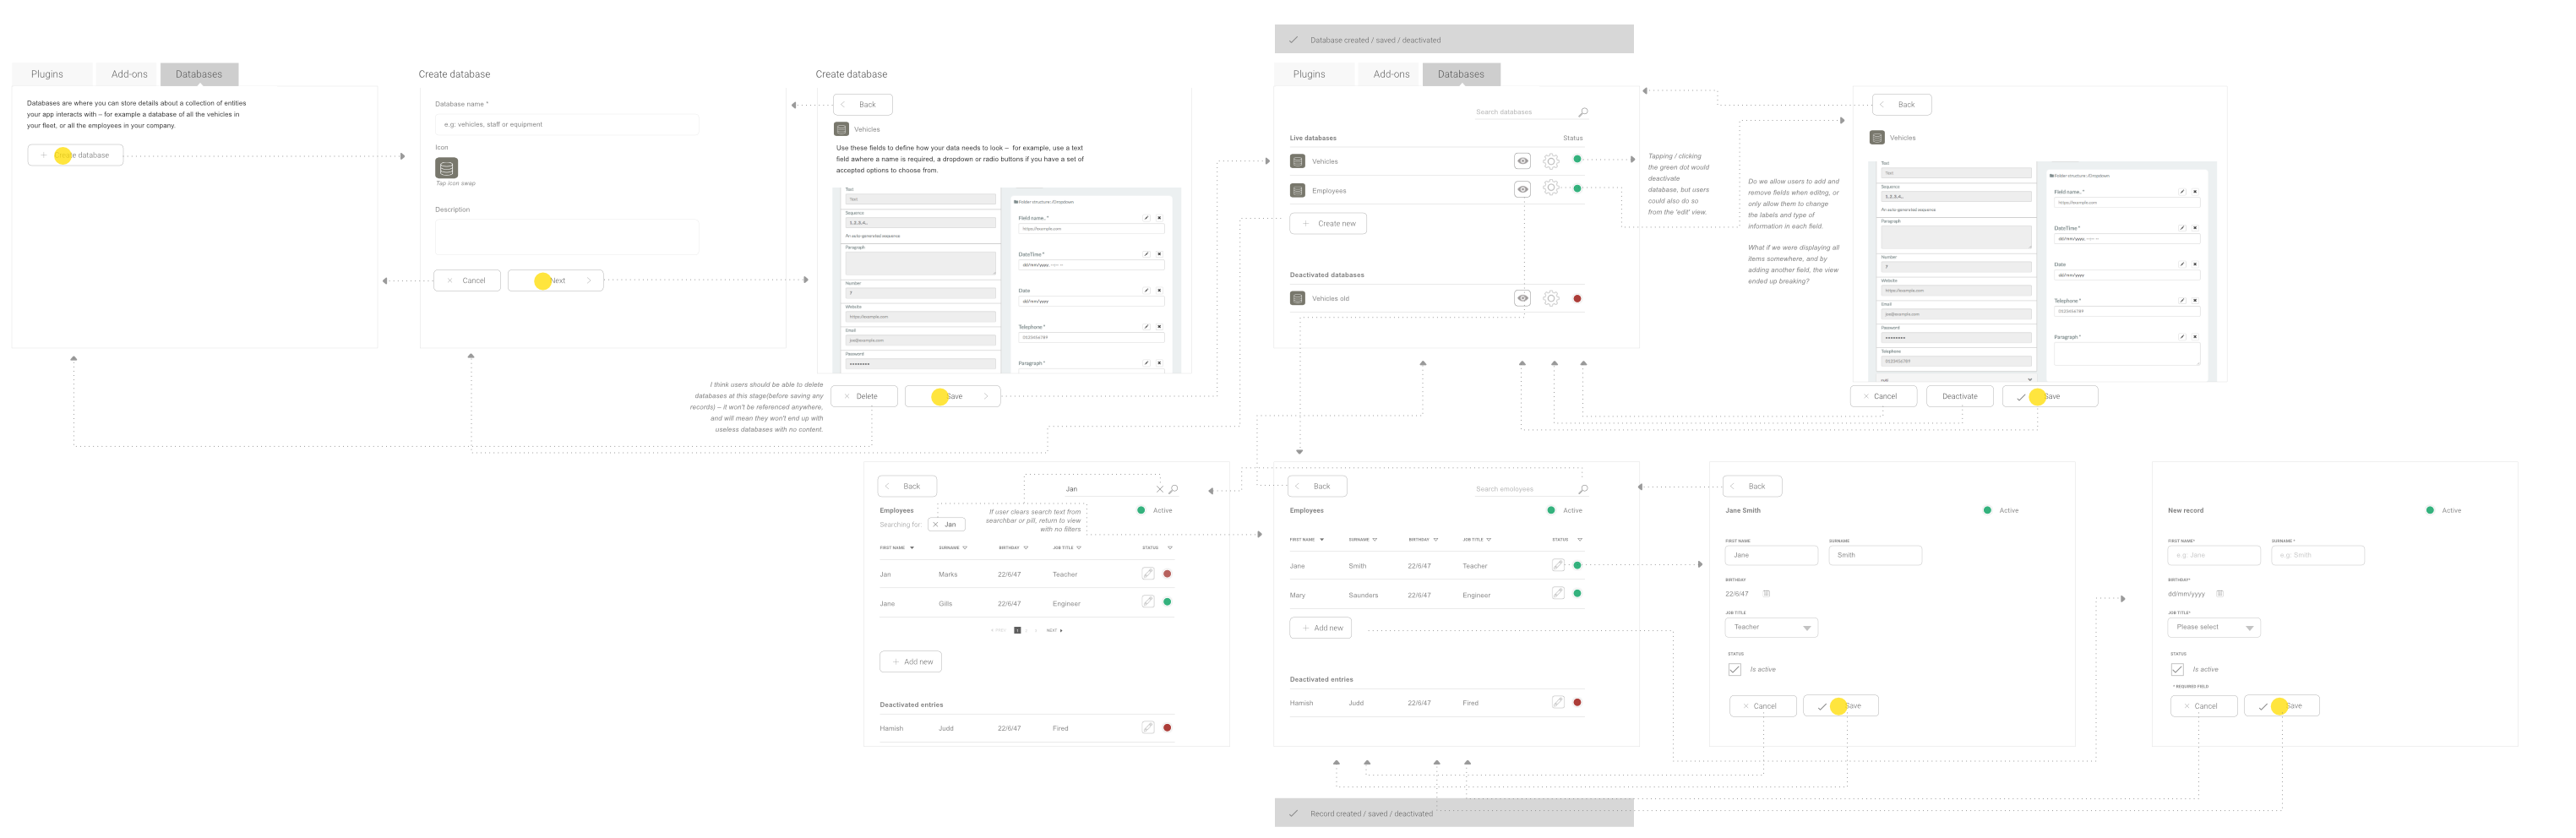 The entities UX wireframe by Charlotte Clark